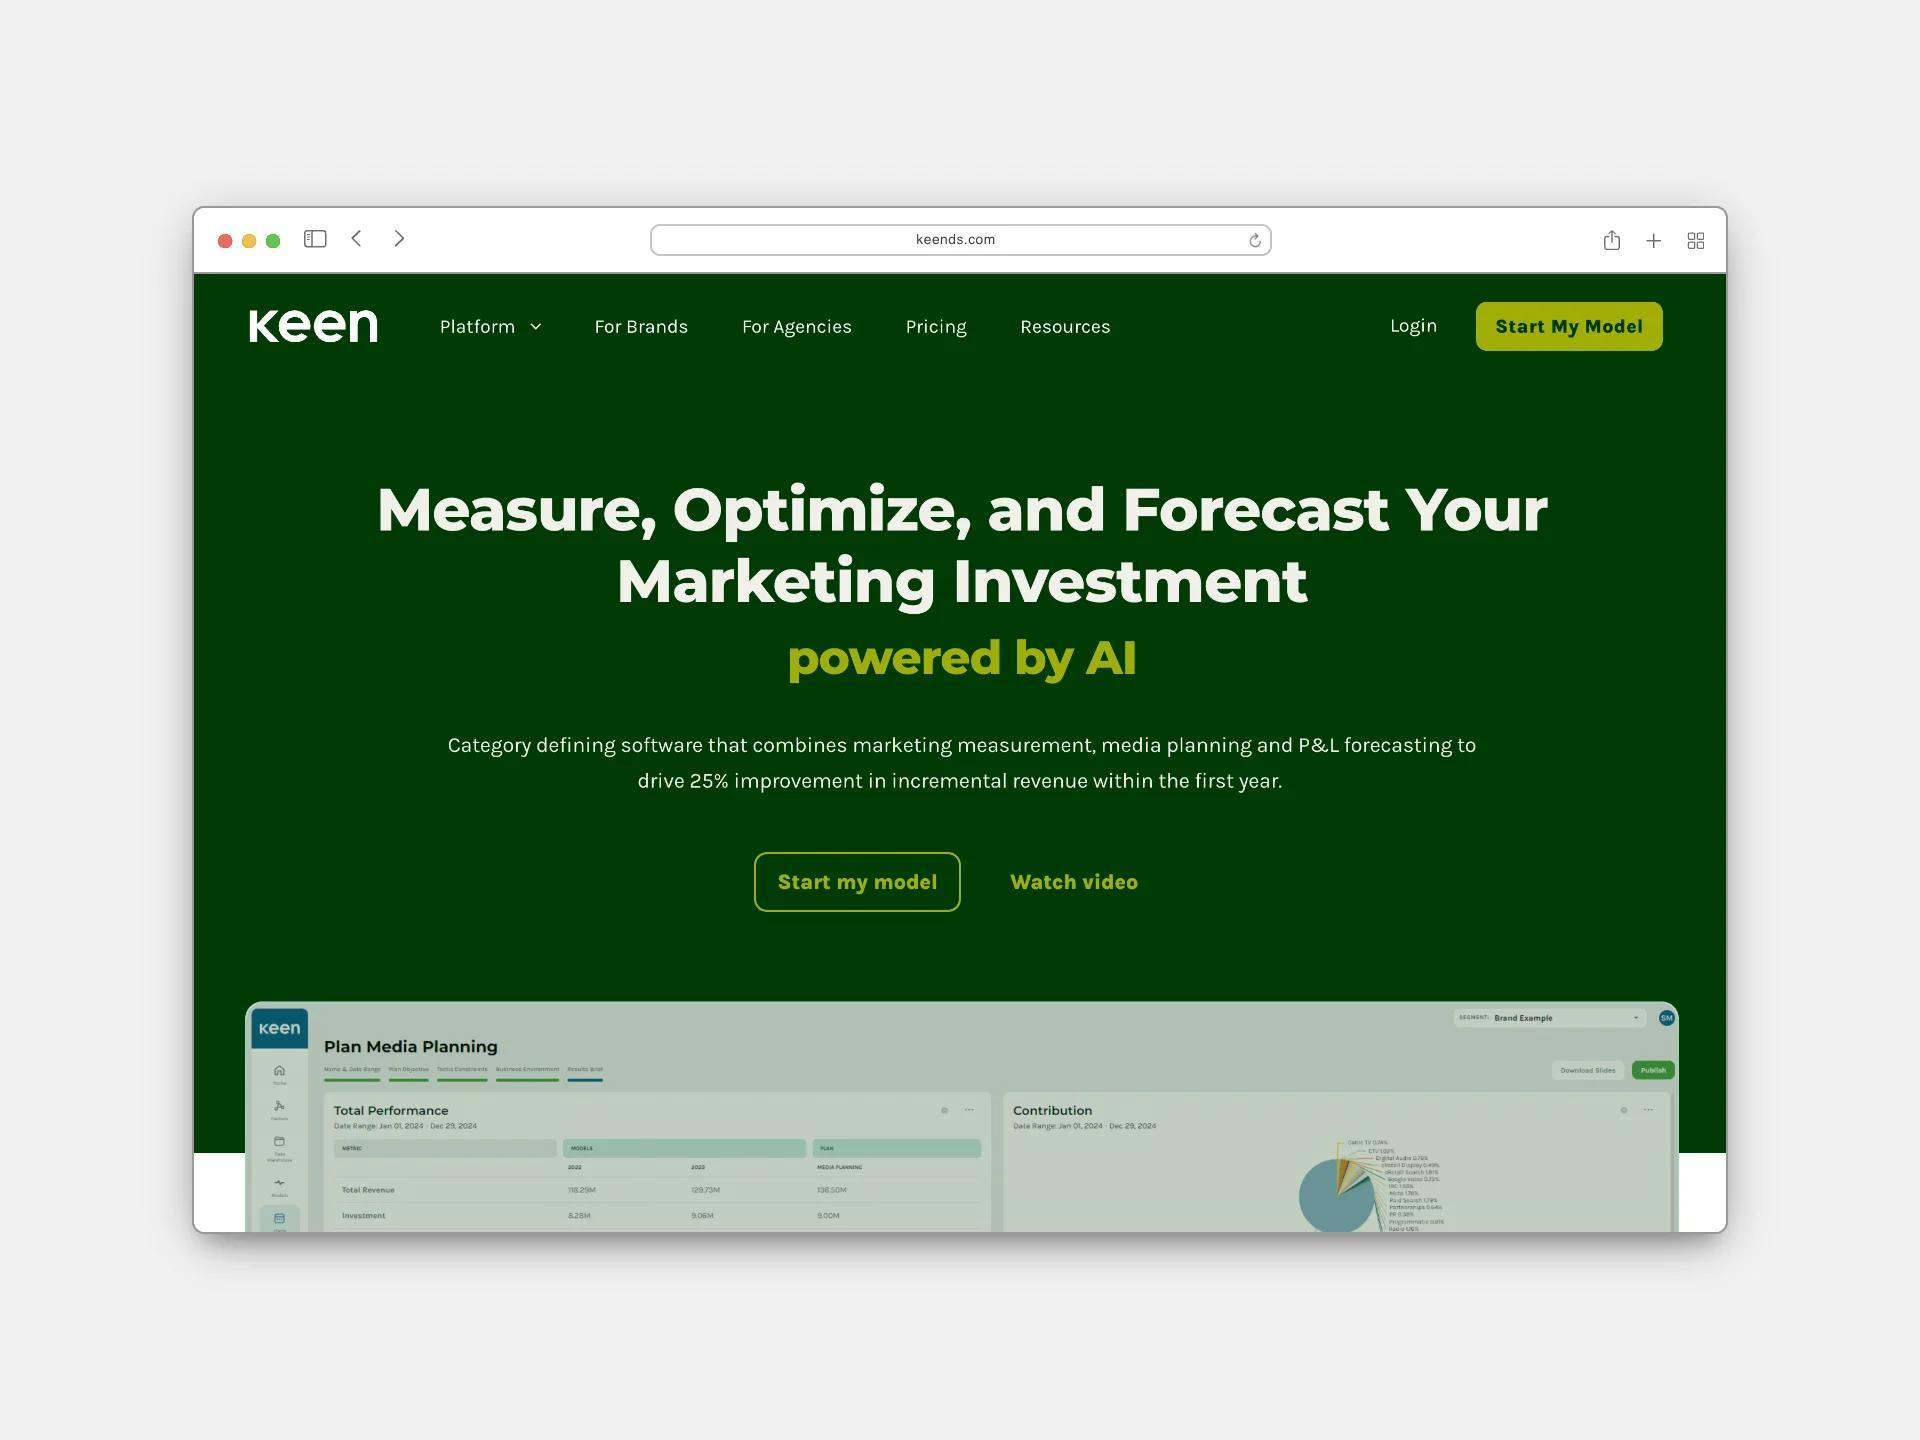 Keen, the marketing investment planning tool for enterprises